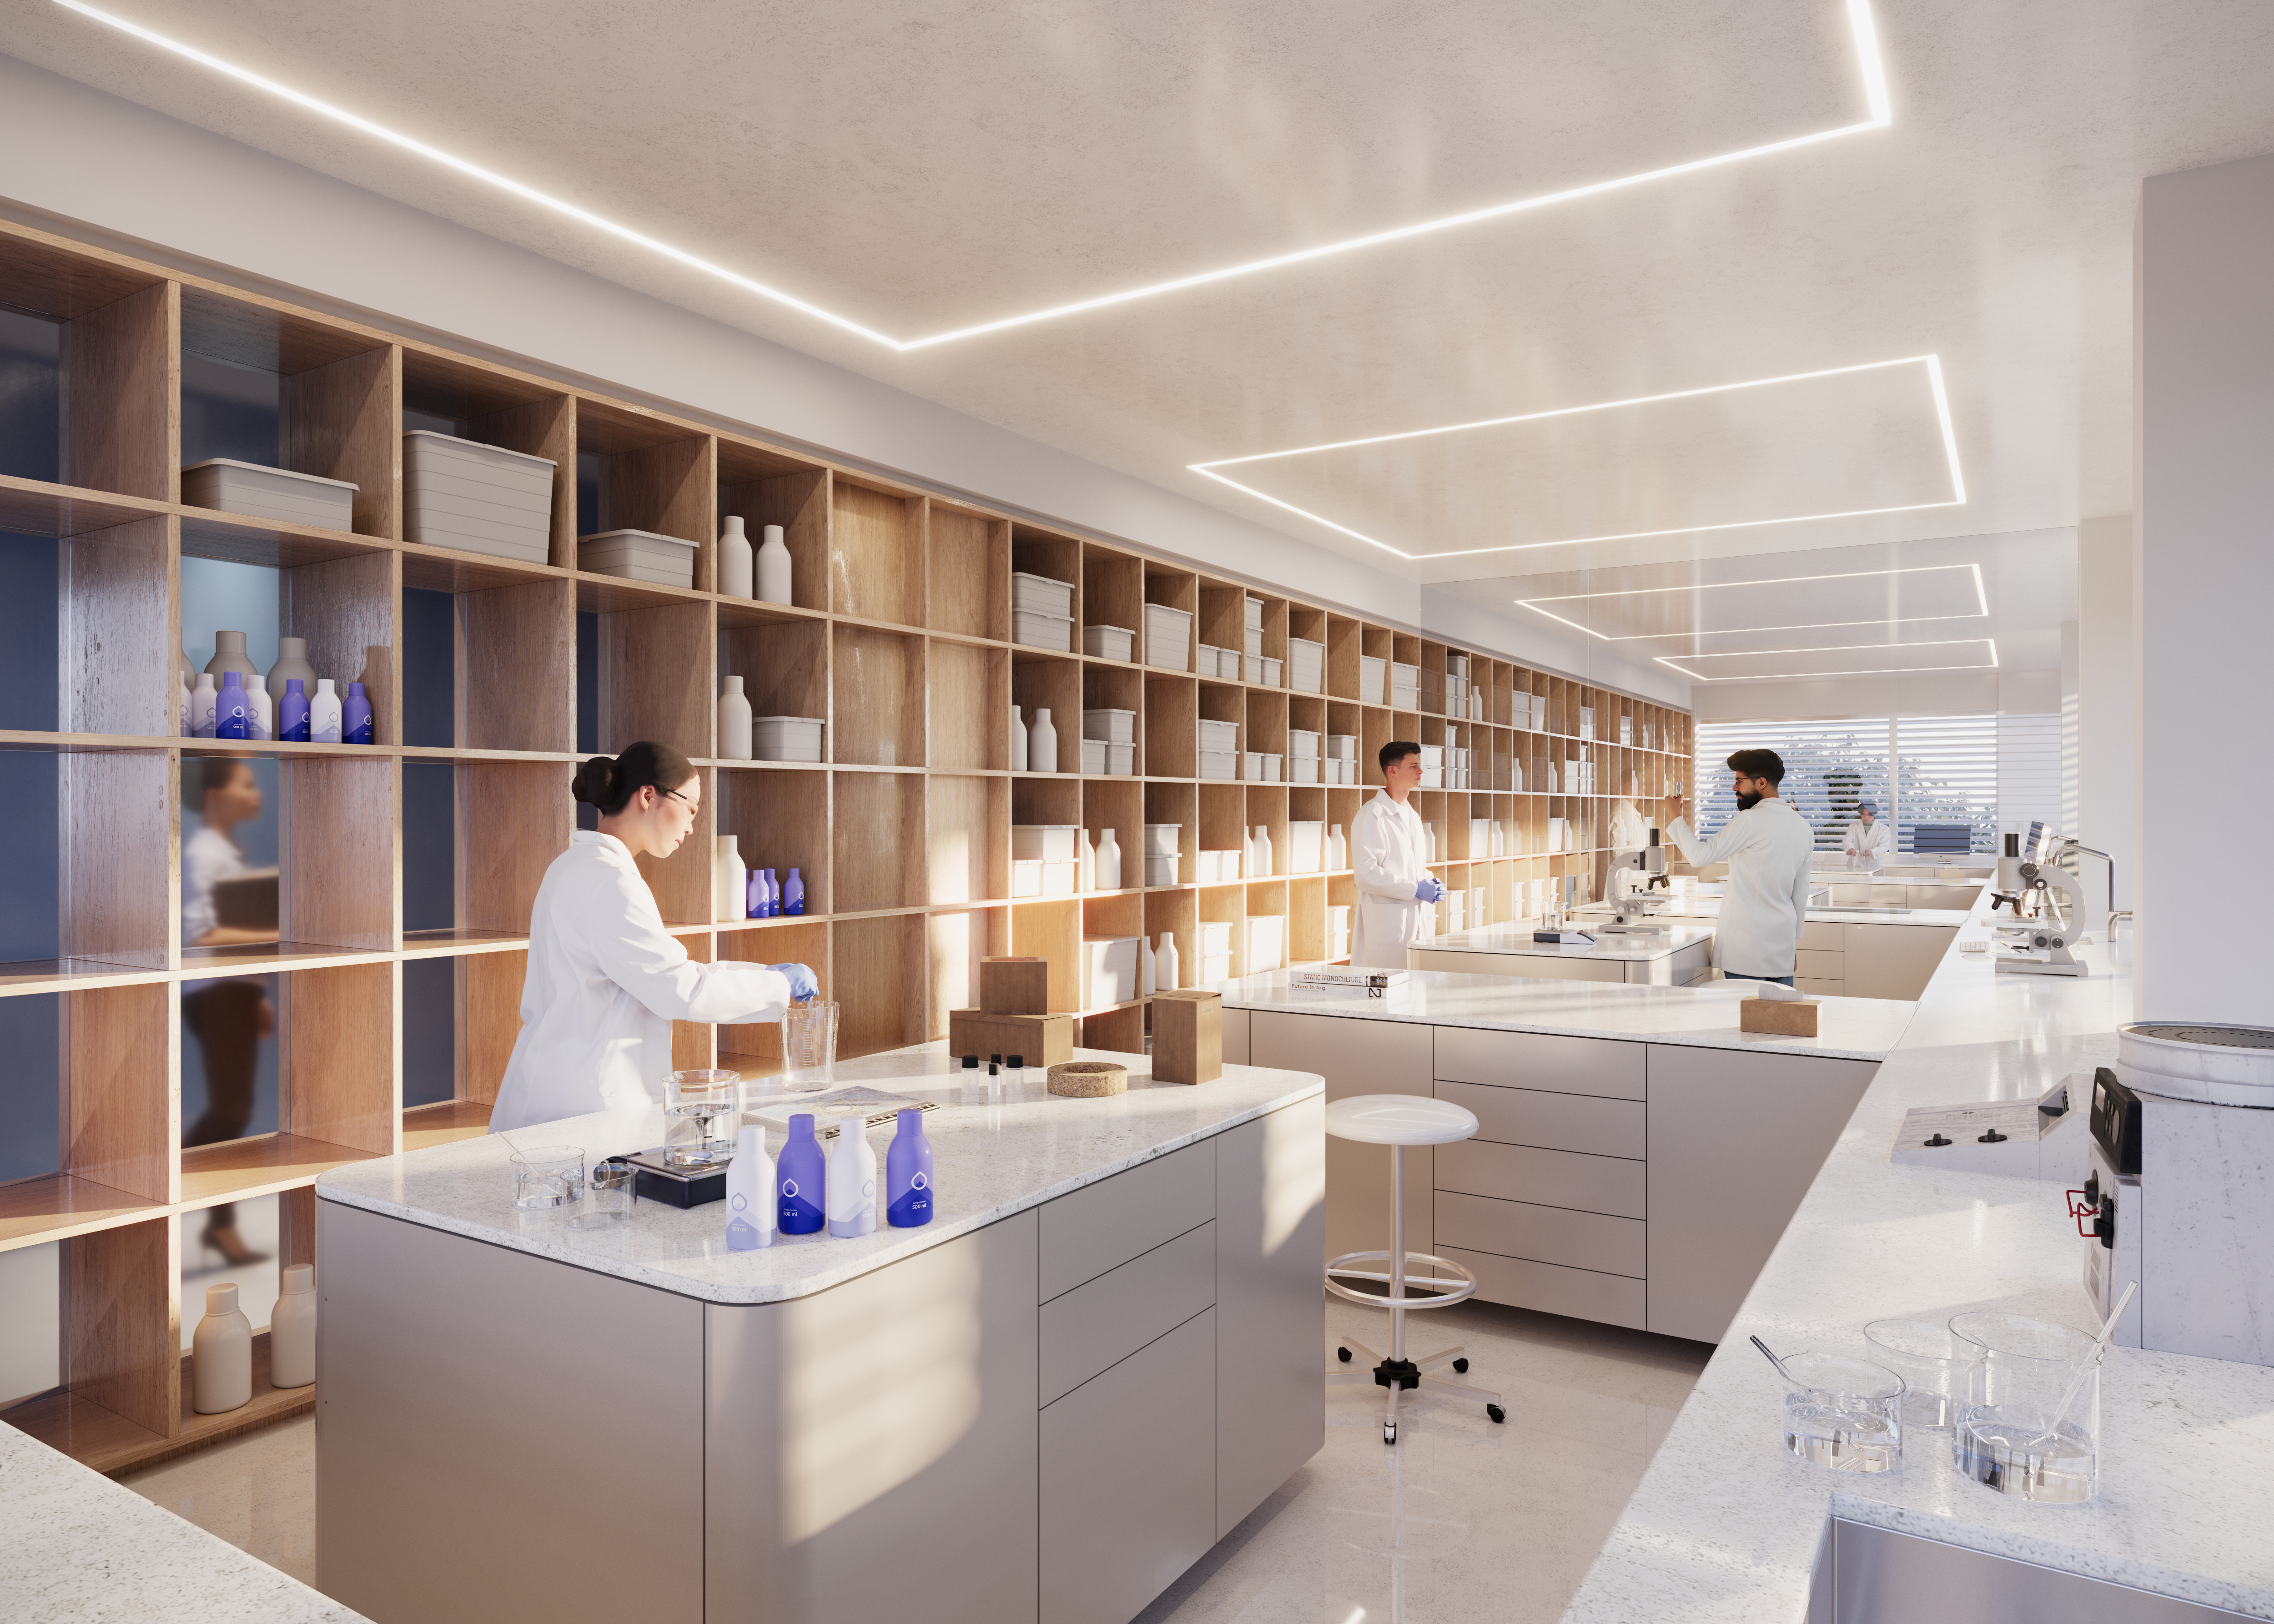 TOSLA Nutricosmetics Announces New Headquarters and Super Factory in Collaboration with Triiije Architects